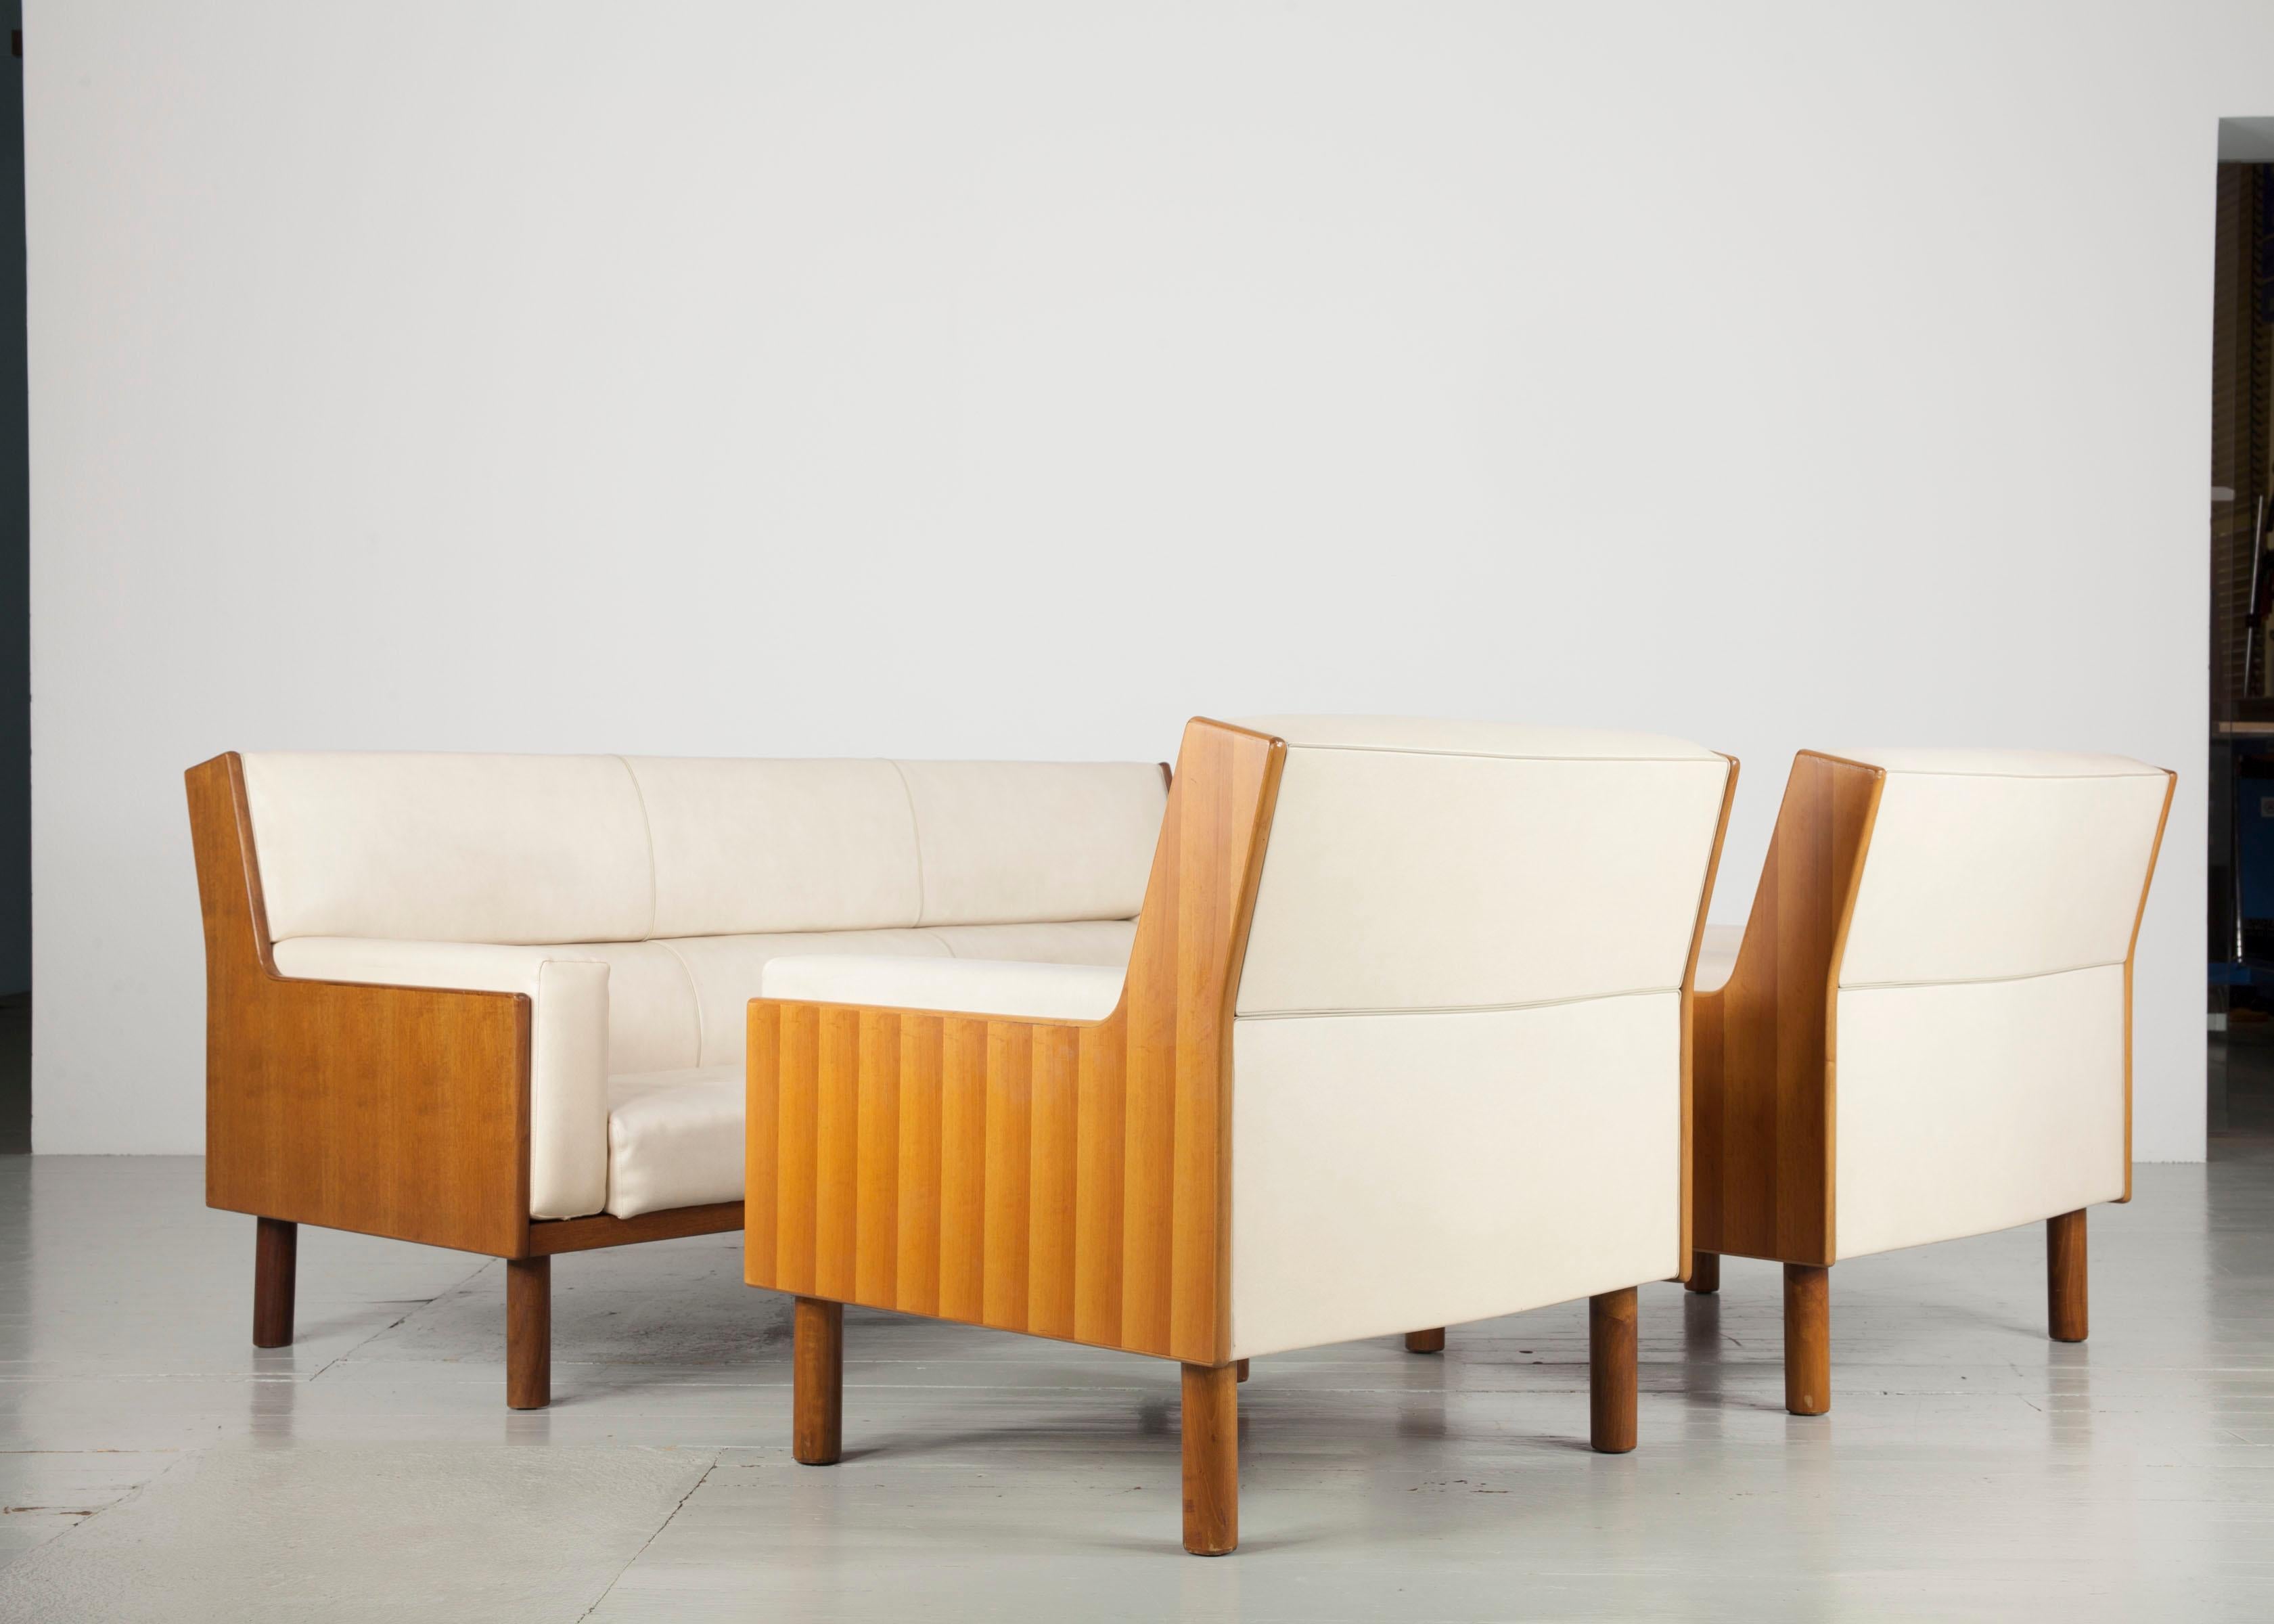 Italian Set of 2 Armchairs and Couch, Manufactured by Anonima Castelli Bologna, 1950s For Sale